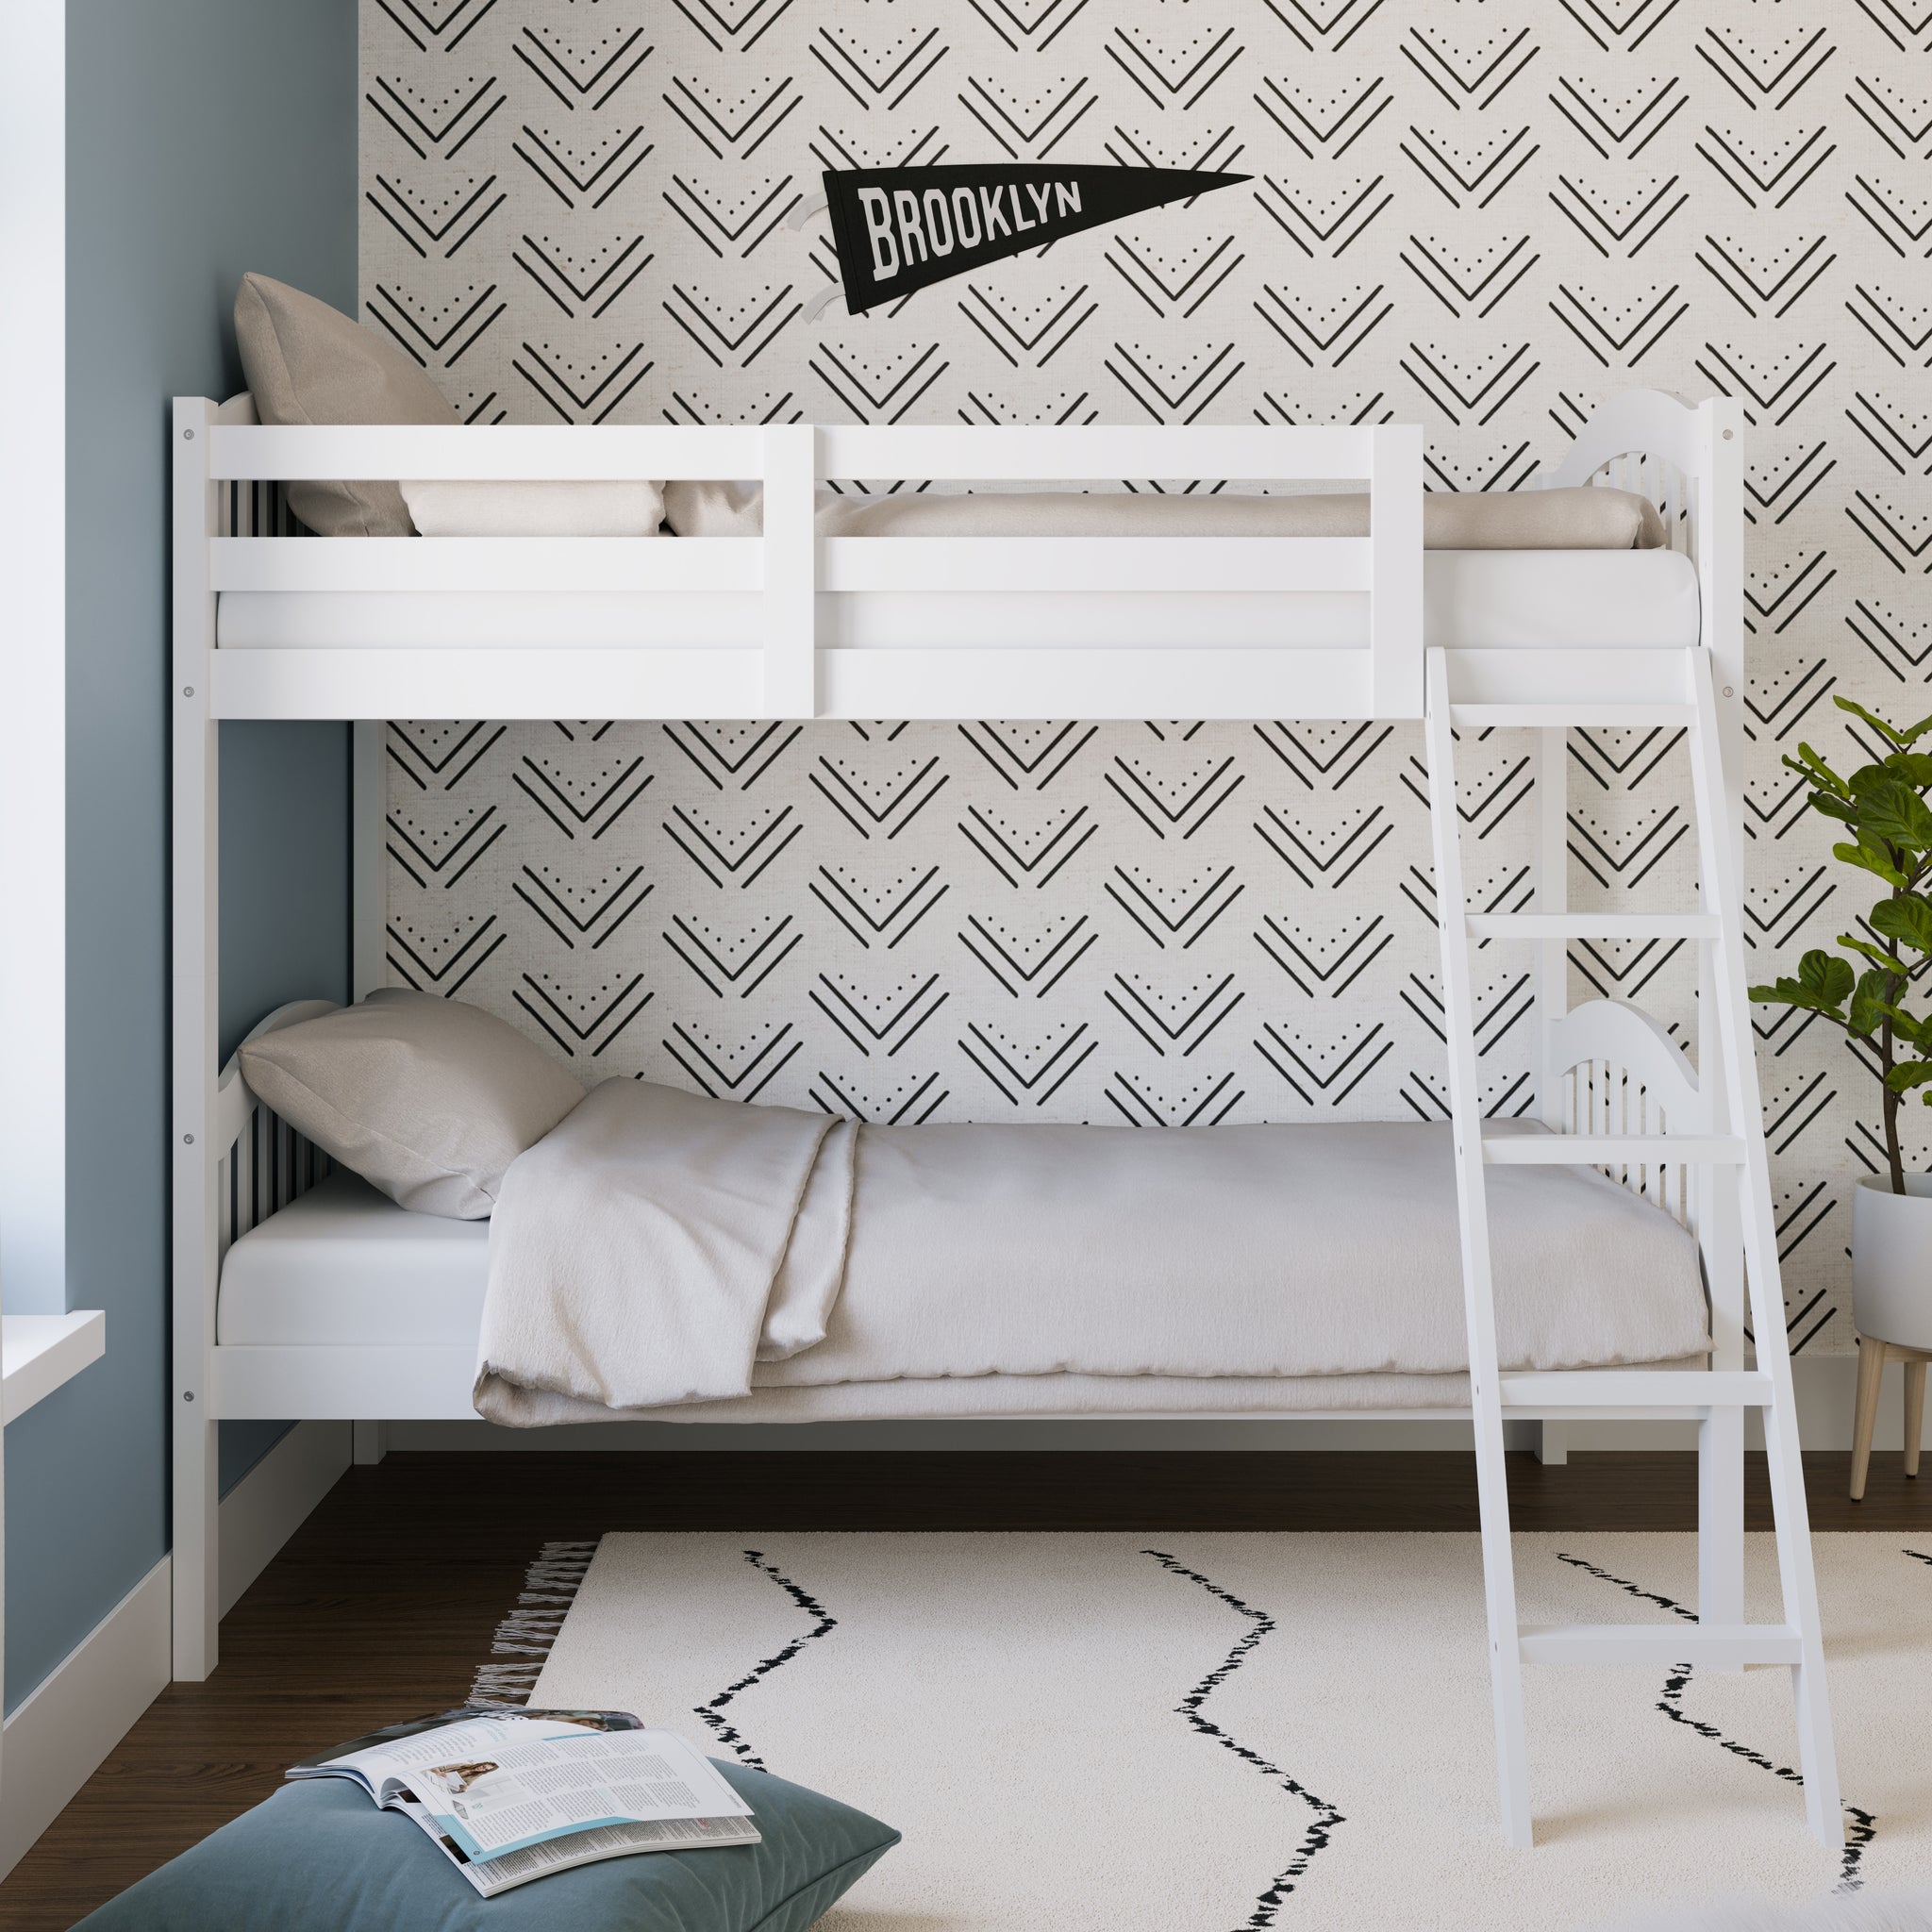 white bunk bed with fixed ladder side view in nursery